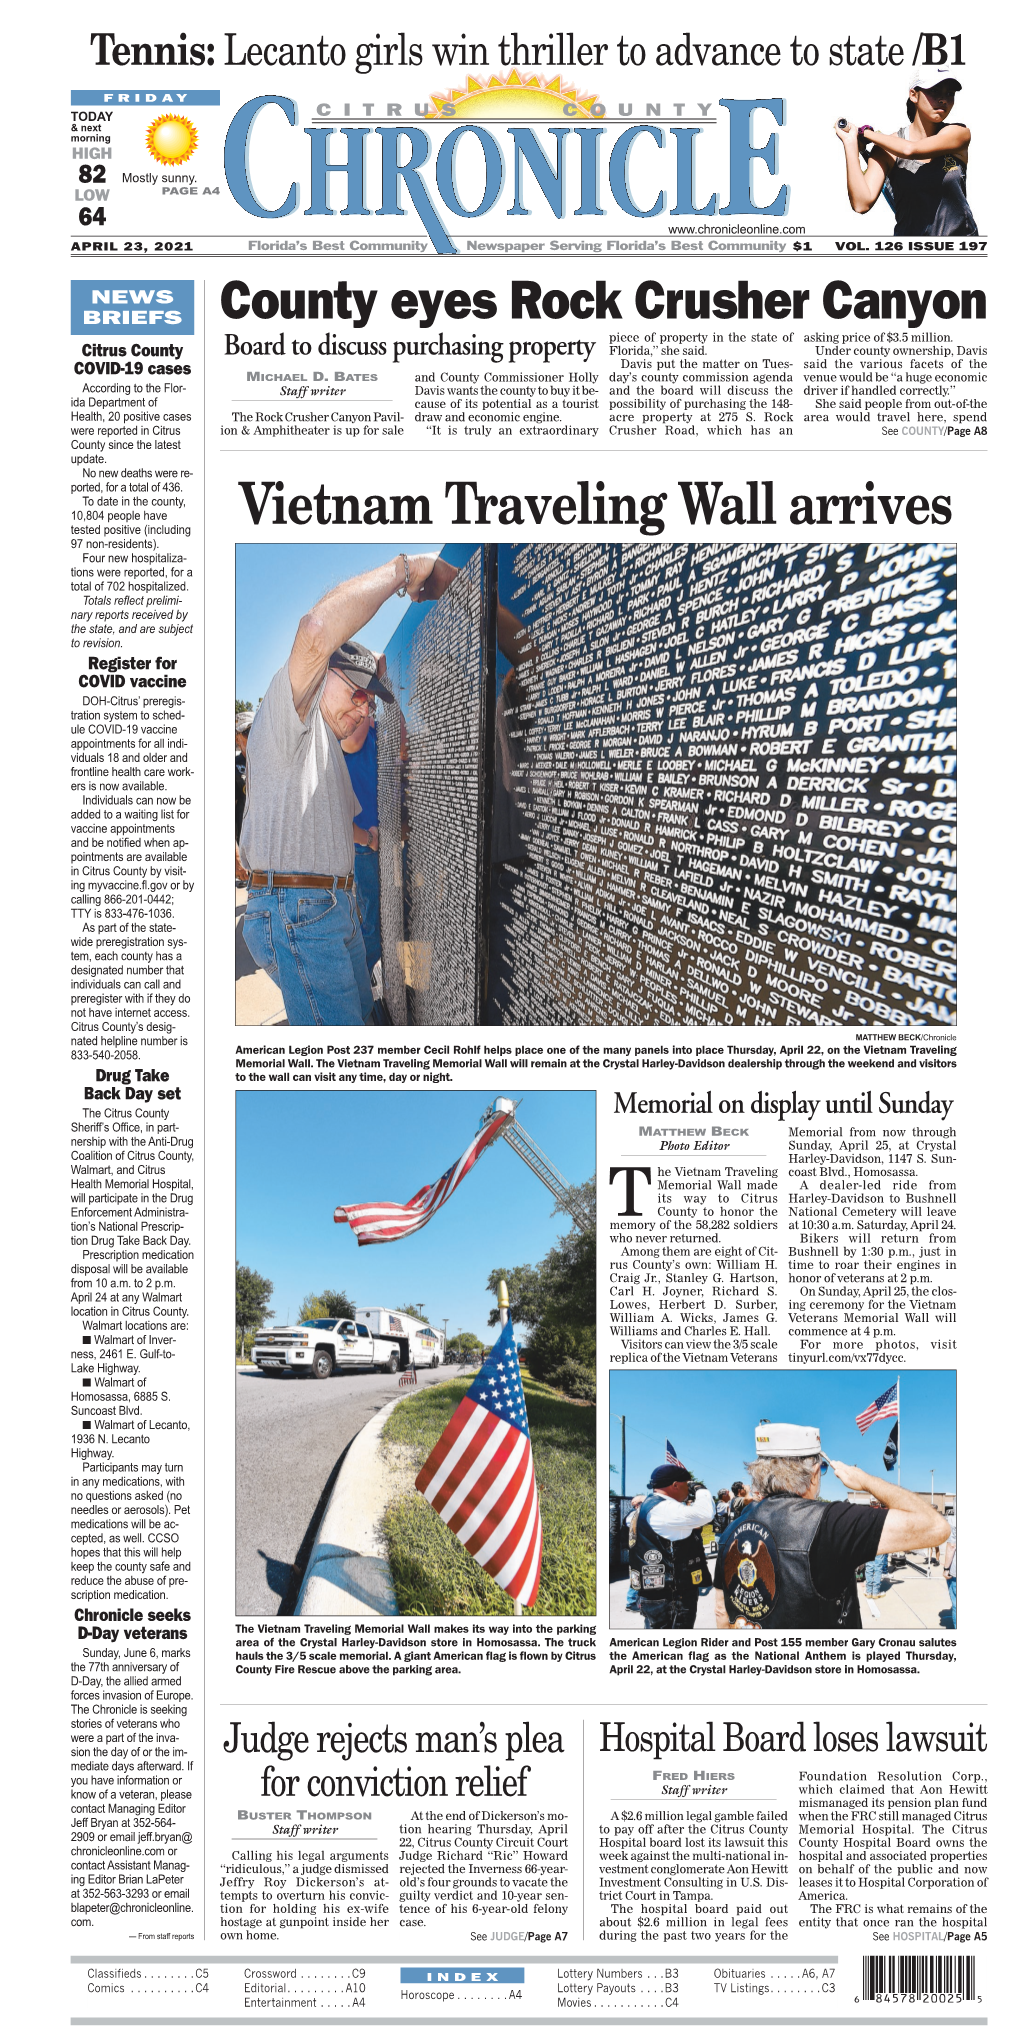 Vietnam Traveling Wall Arrives Tested Positive (Including 97 Non-Residents)